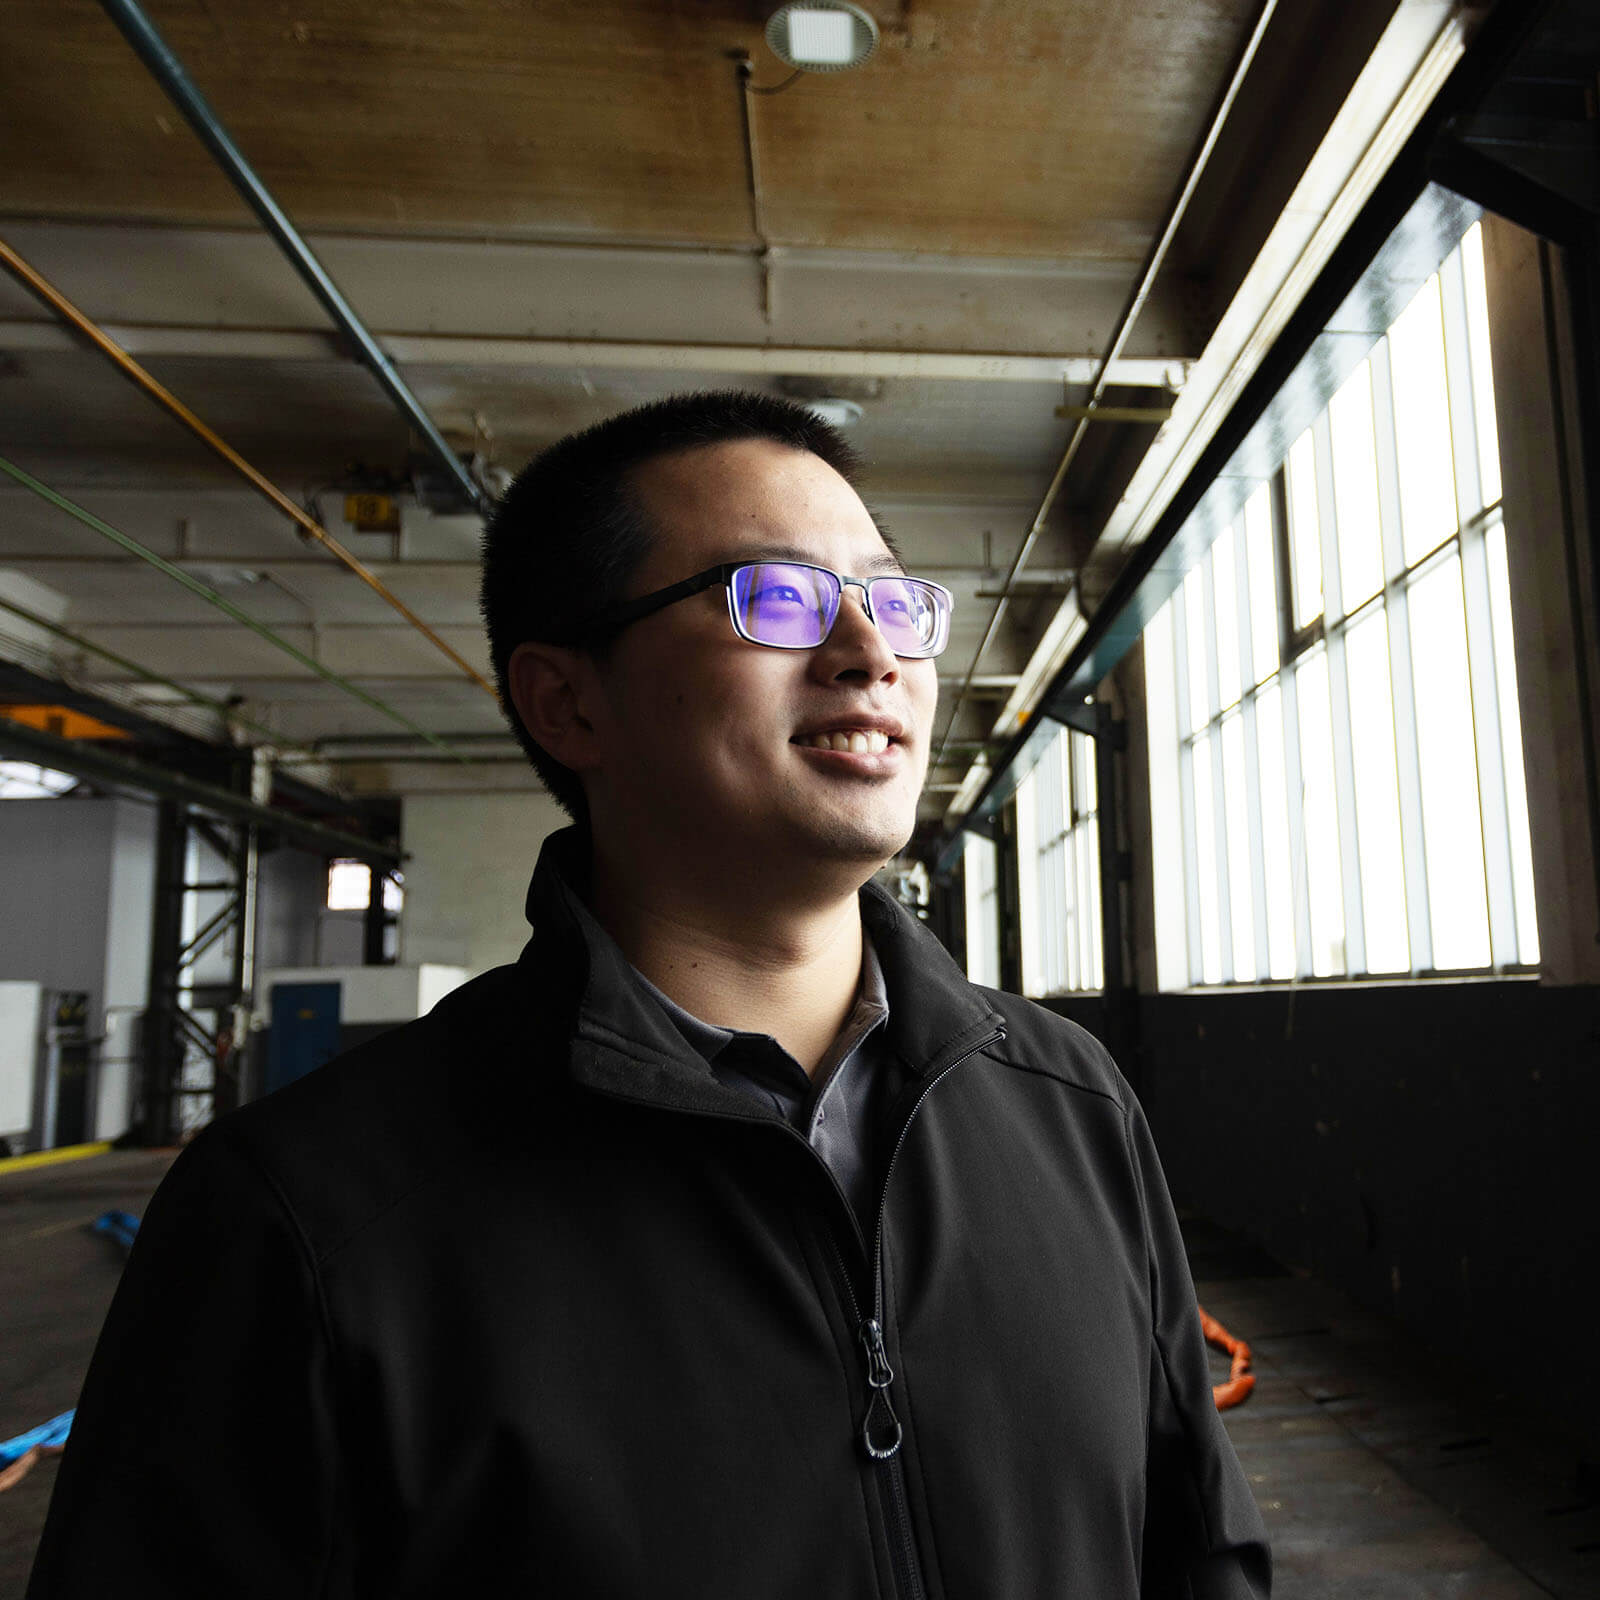 Liang, a voestalpine employee, smiles towards the window in a factory hall on the right.